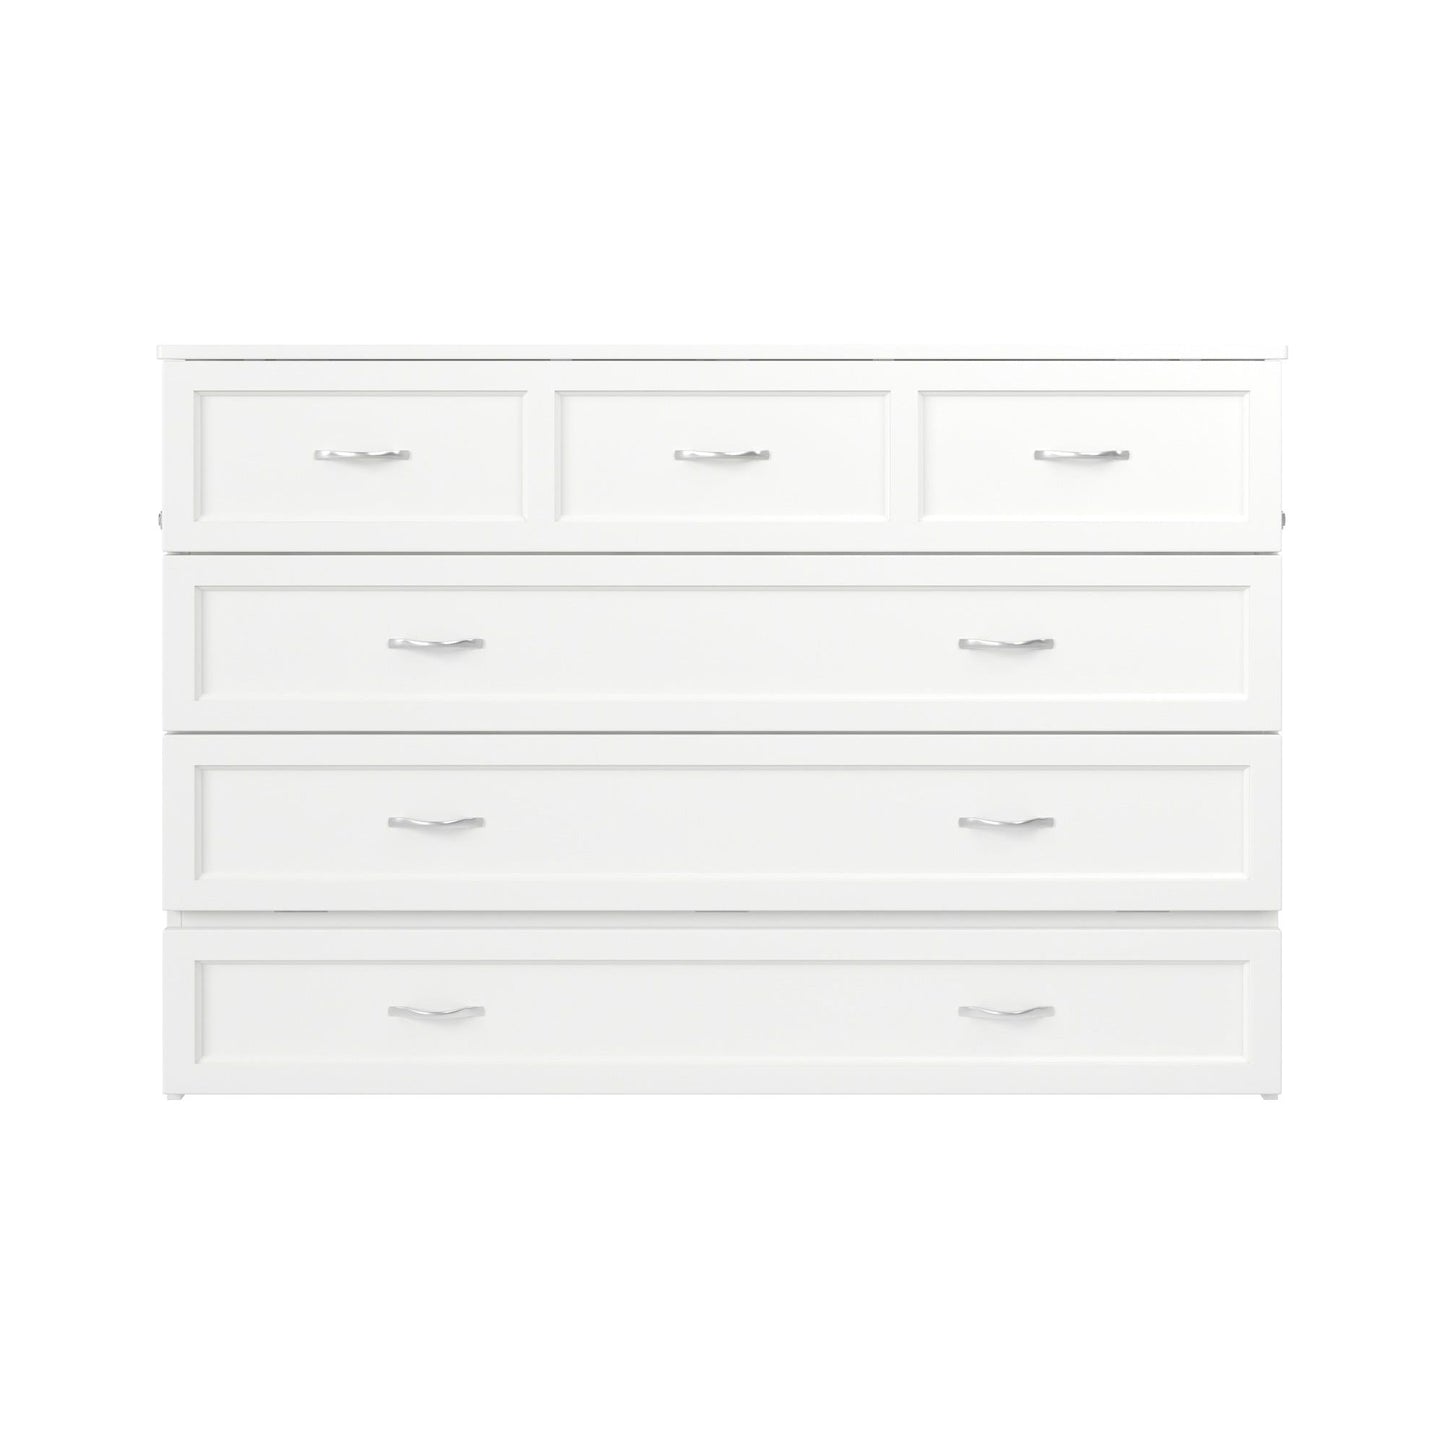 AFI Furnishings Northfield Queen Murphy Bed Chest